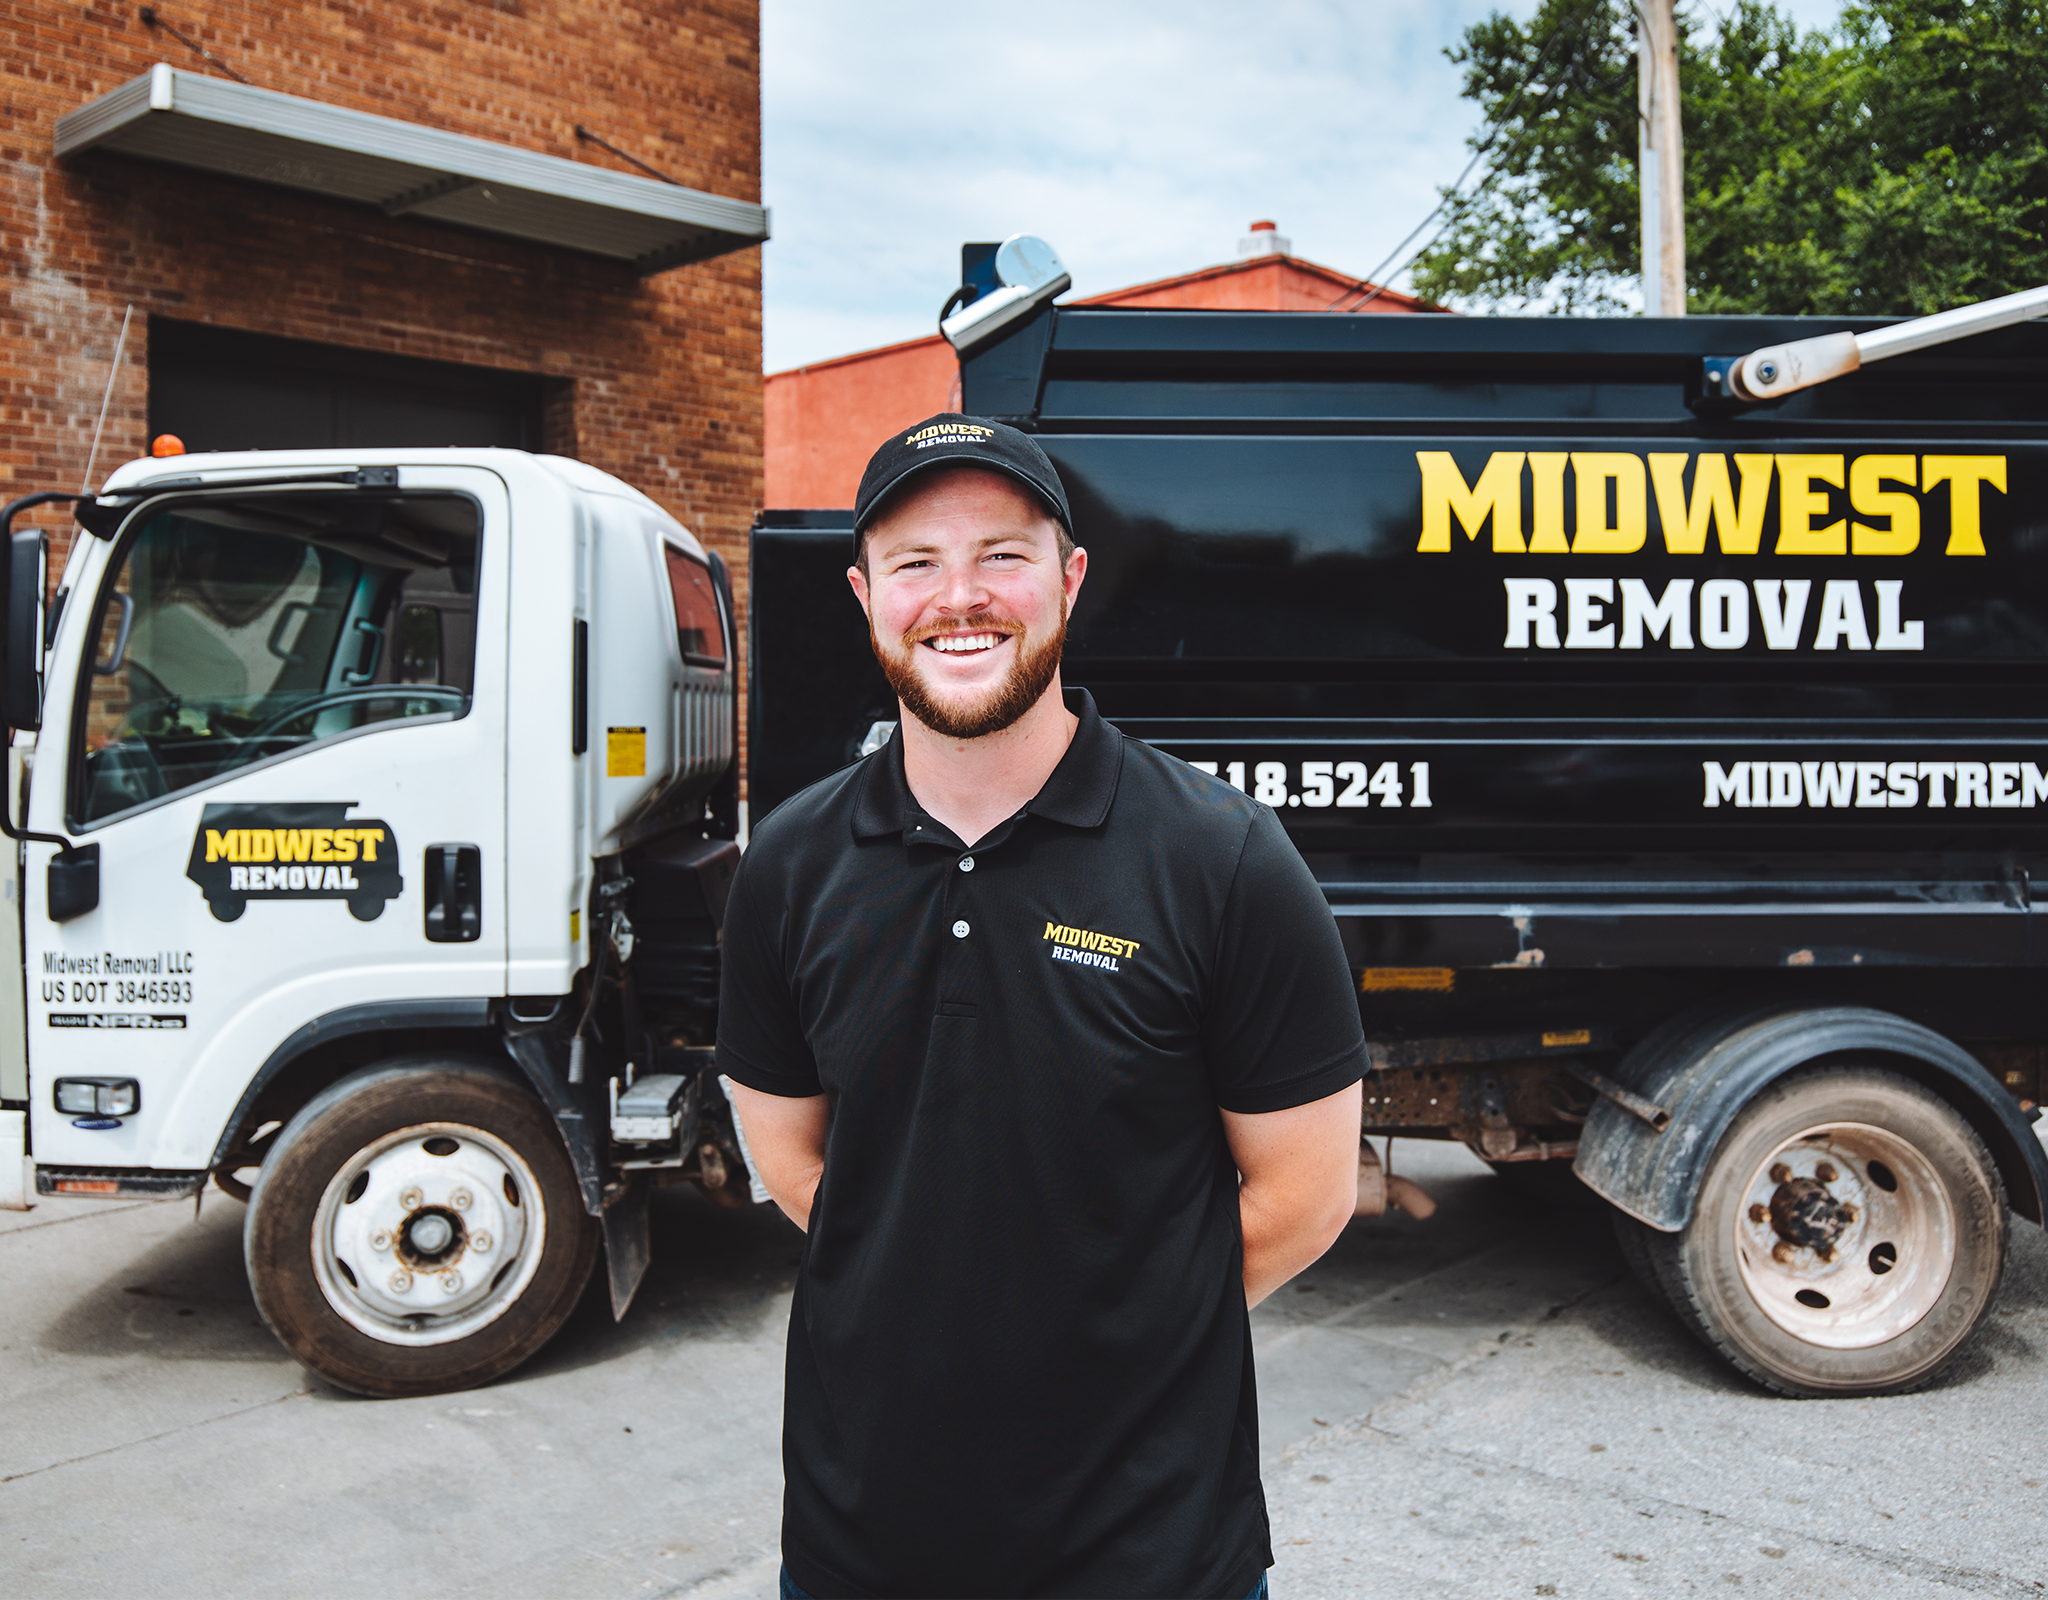 A man, Joe Manzari, wearing a black polo and pants stands smiling in front of a Midwest Removal tuck.